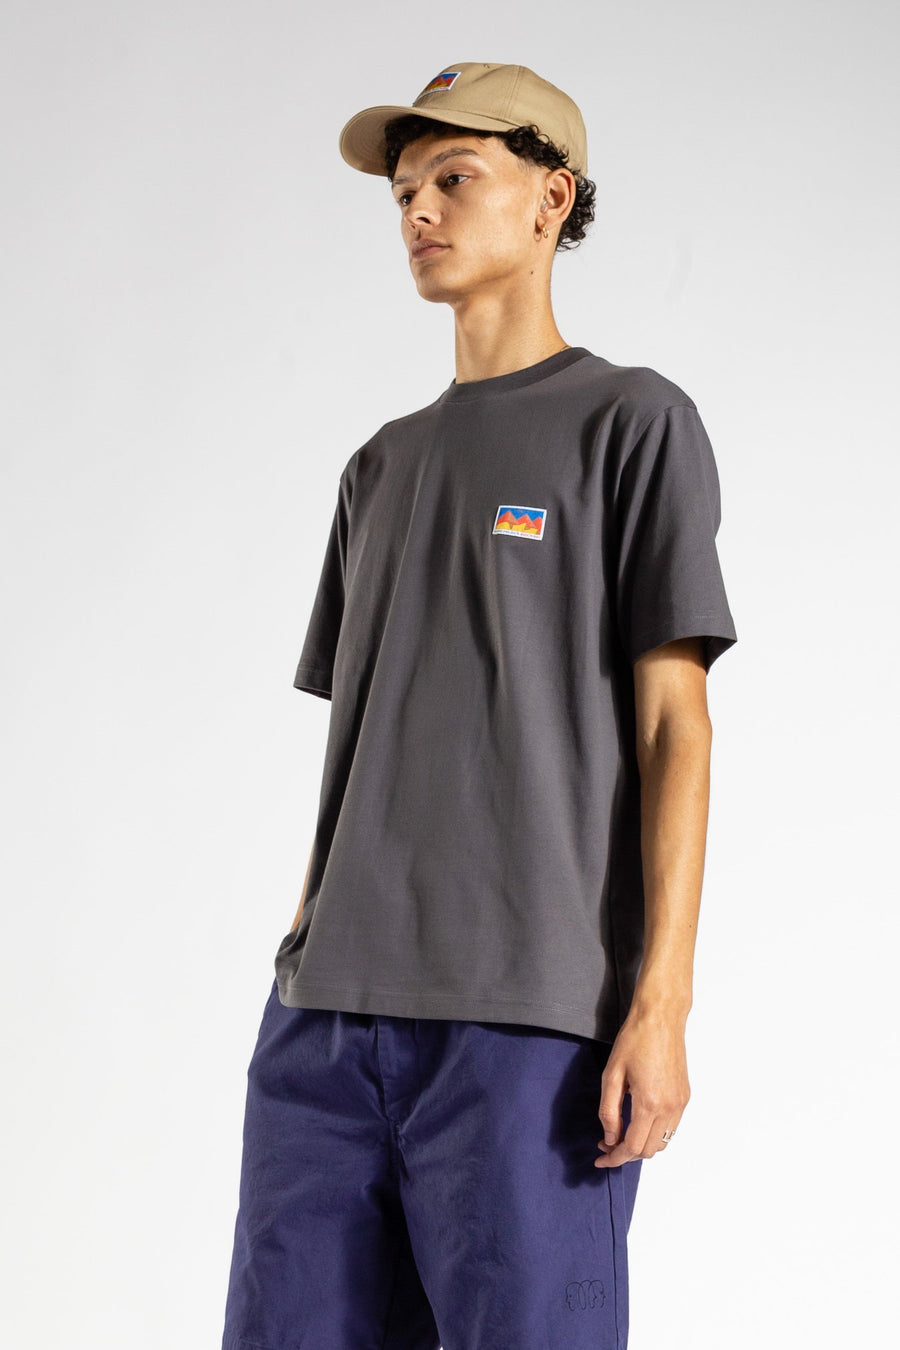 Norse Projects x Geoff McFetridge Johannes Mountains Mouse Grey